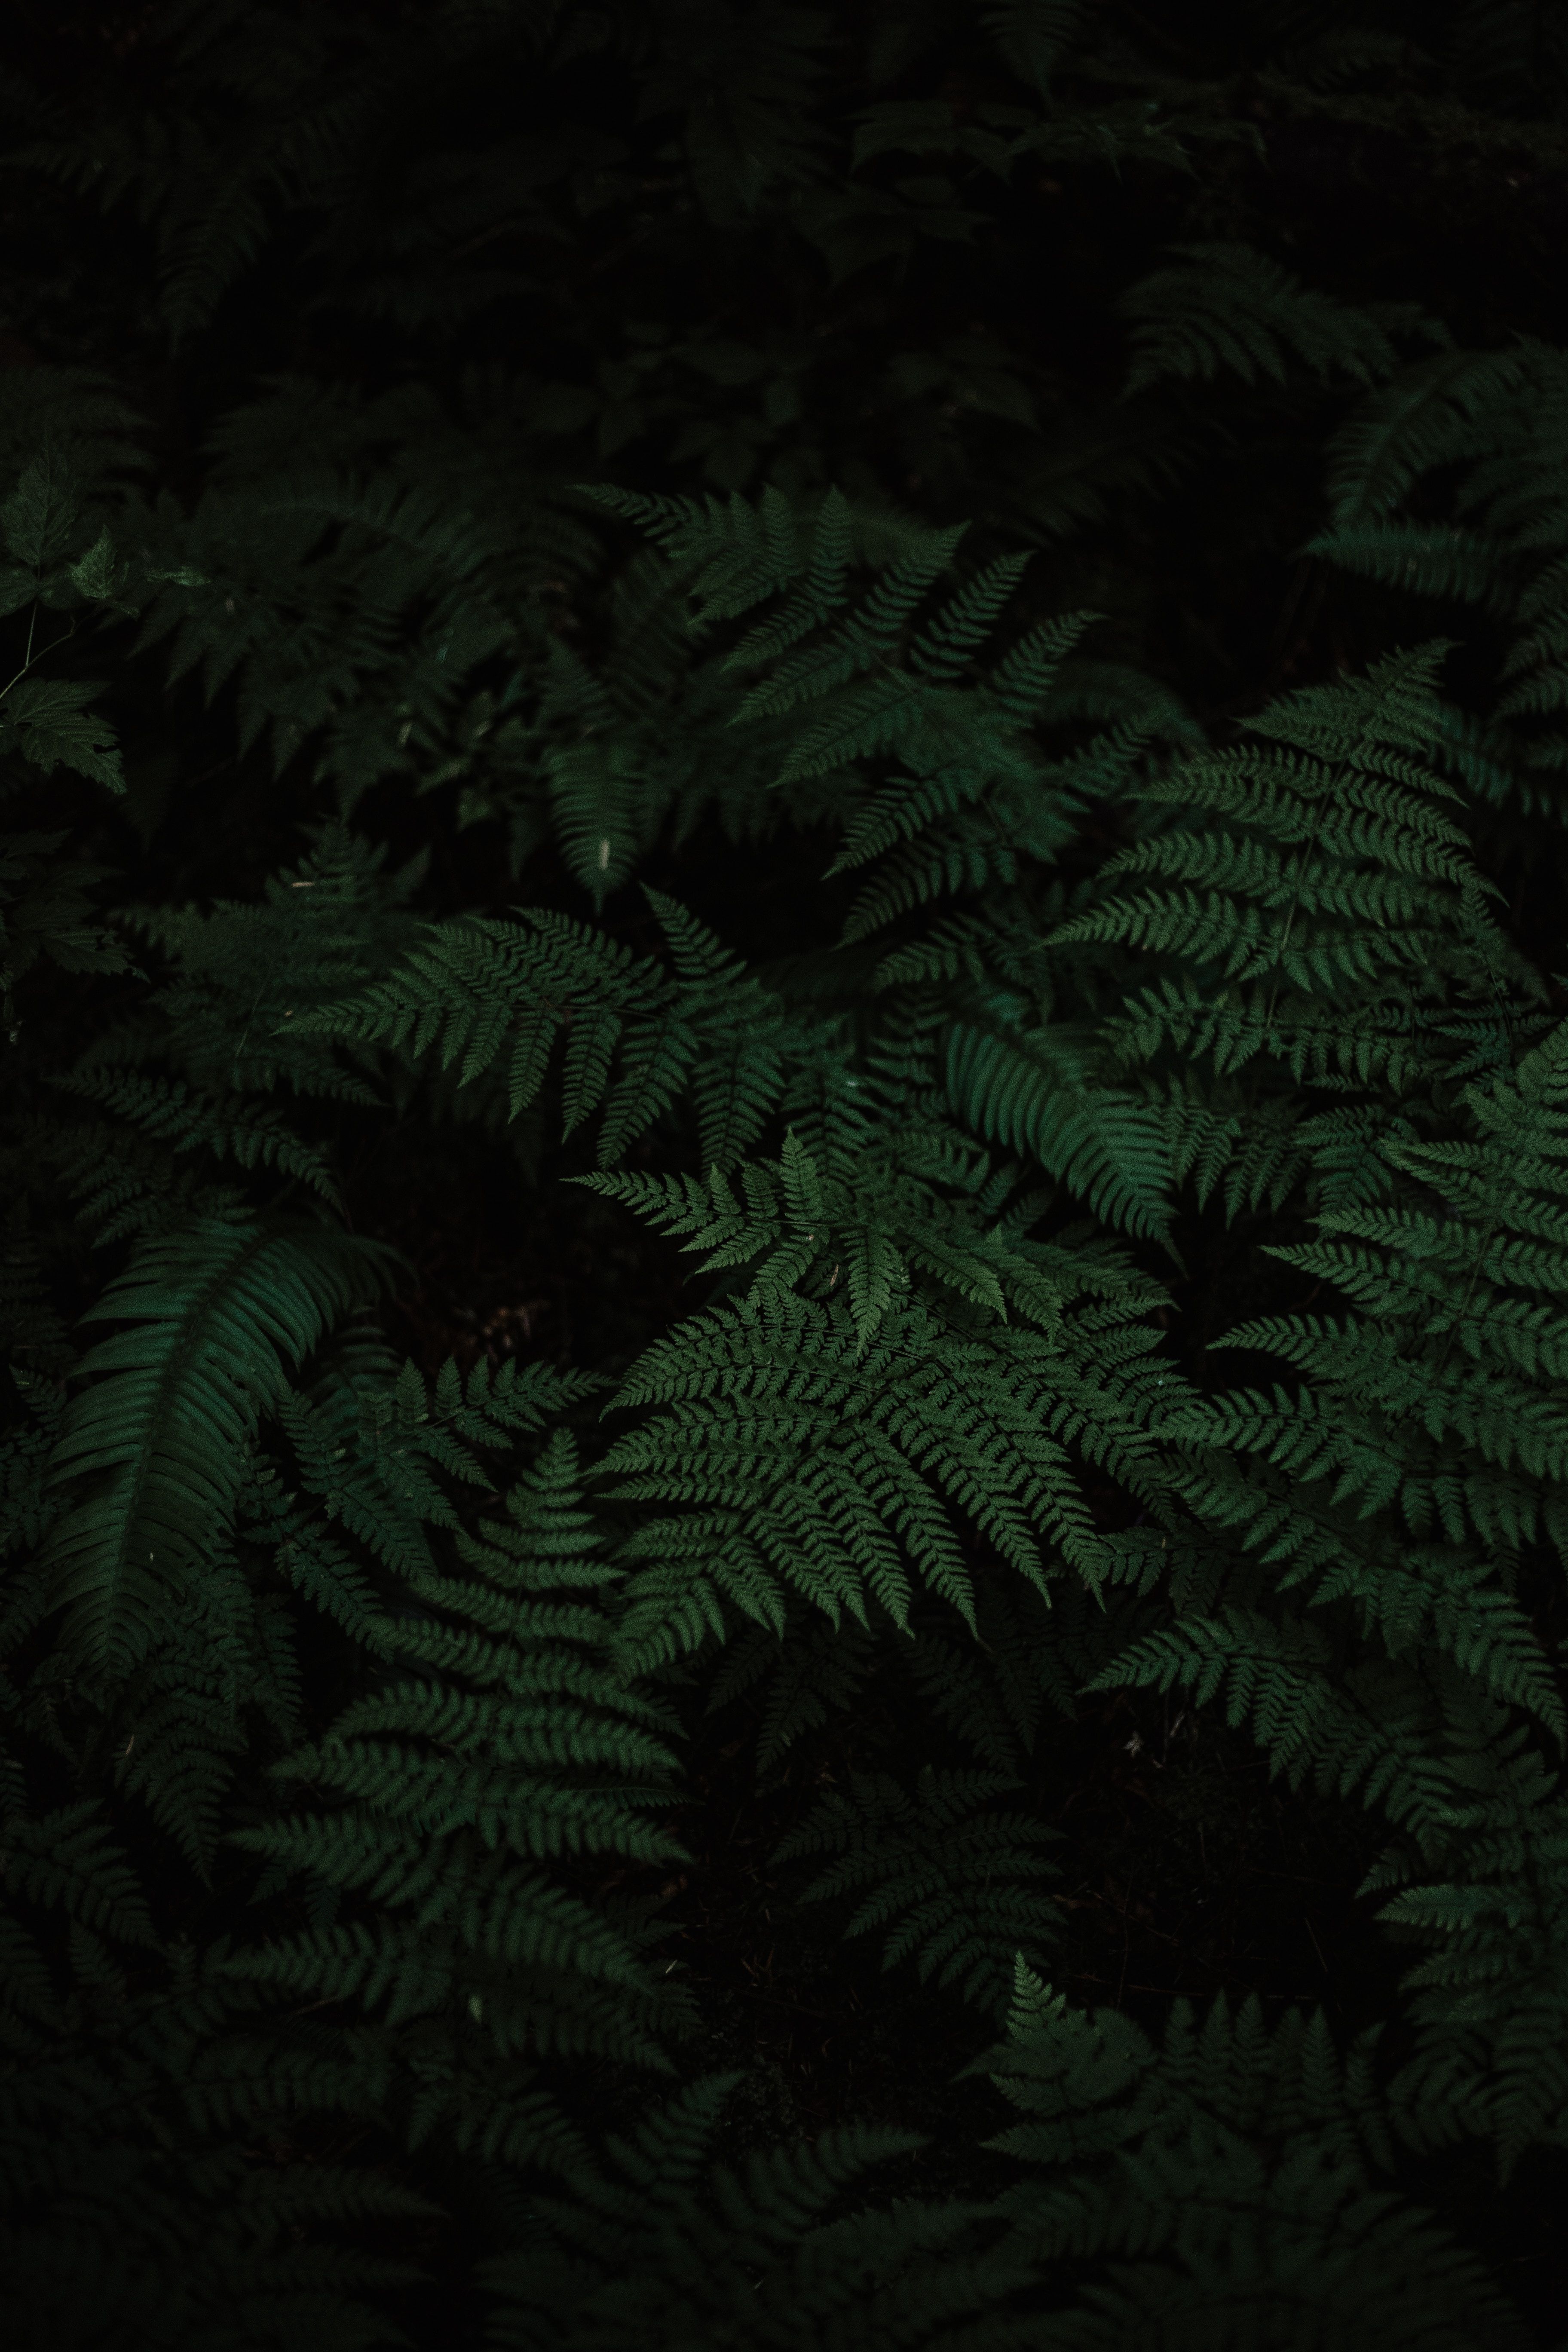 A close up of some green leaves - Jungle